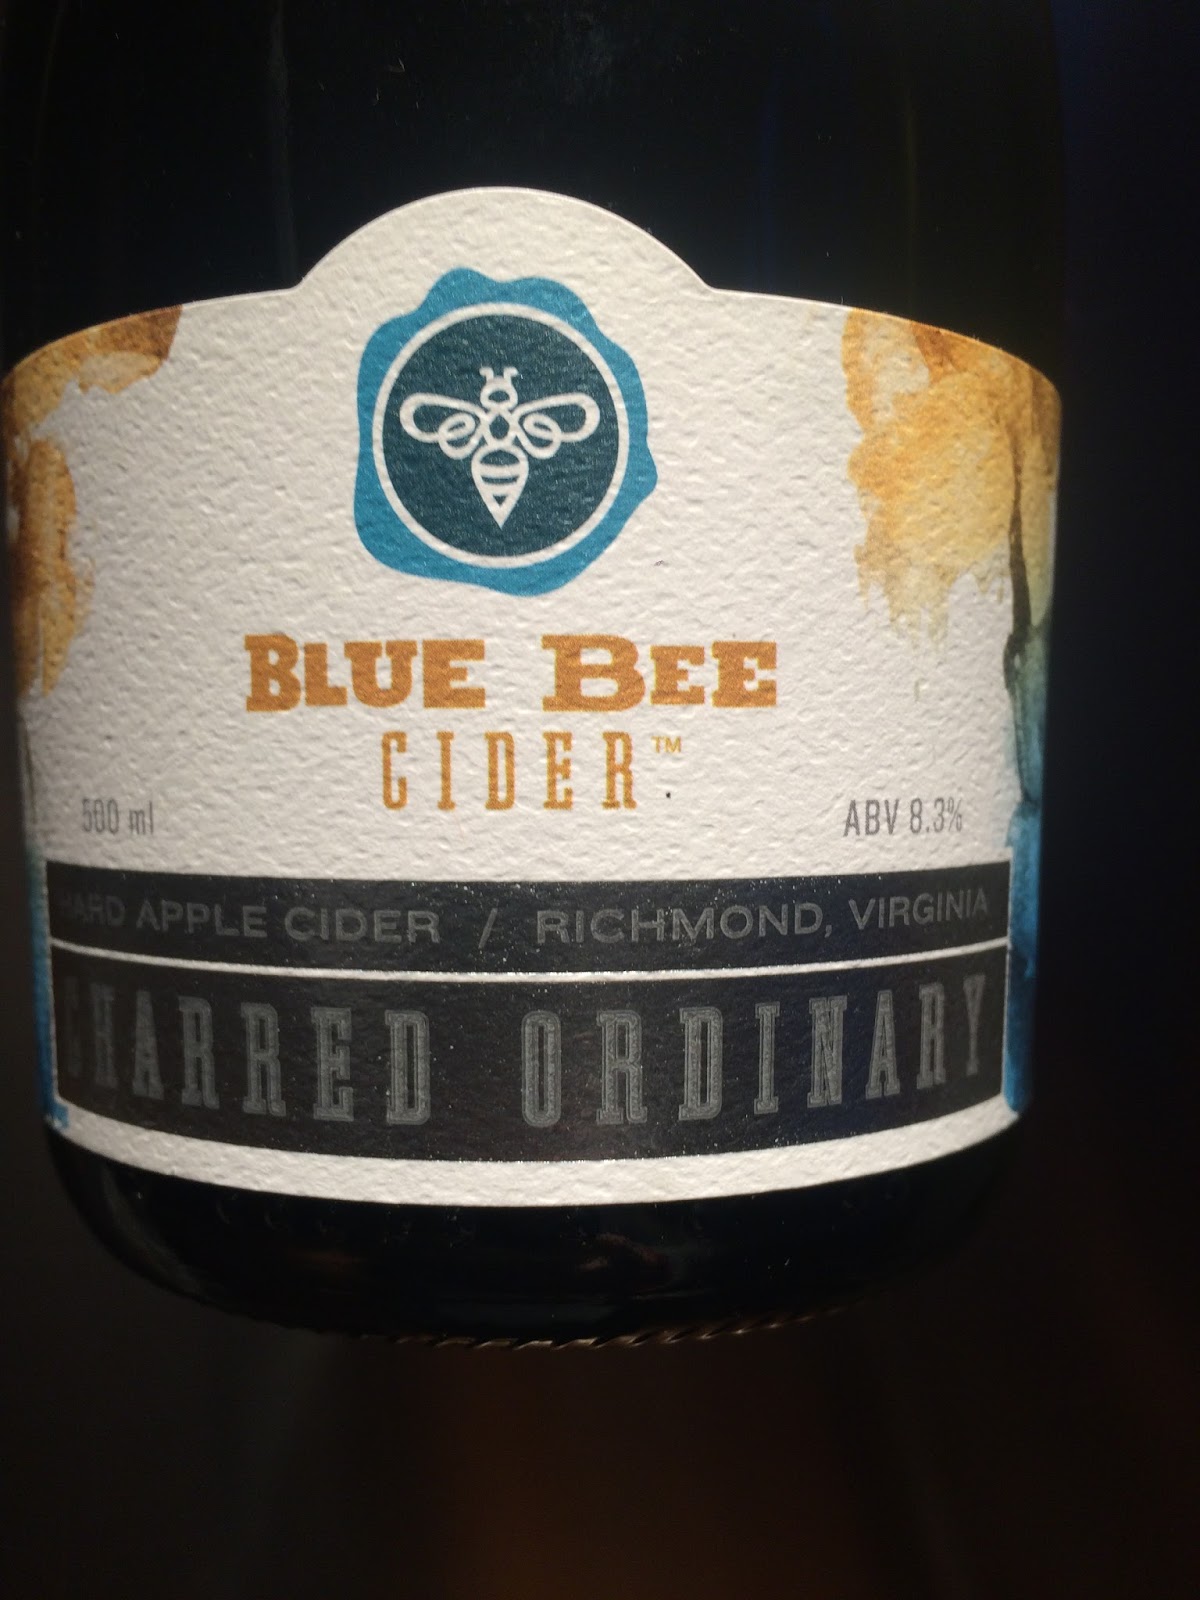 Along Came a Cider: Cider Review: Blue Bee Cider Charred Ordinary